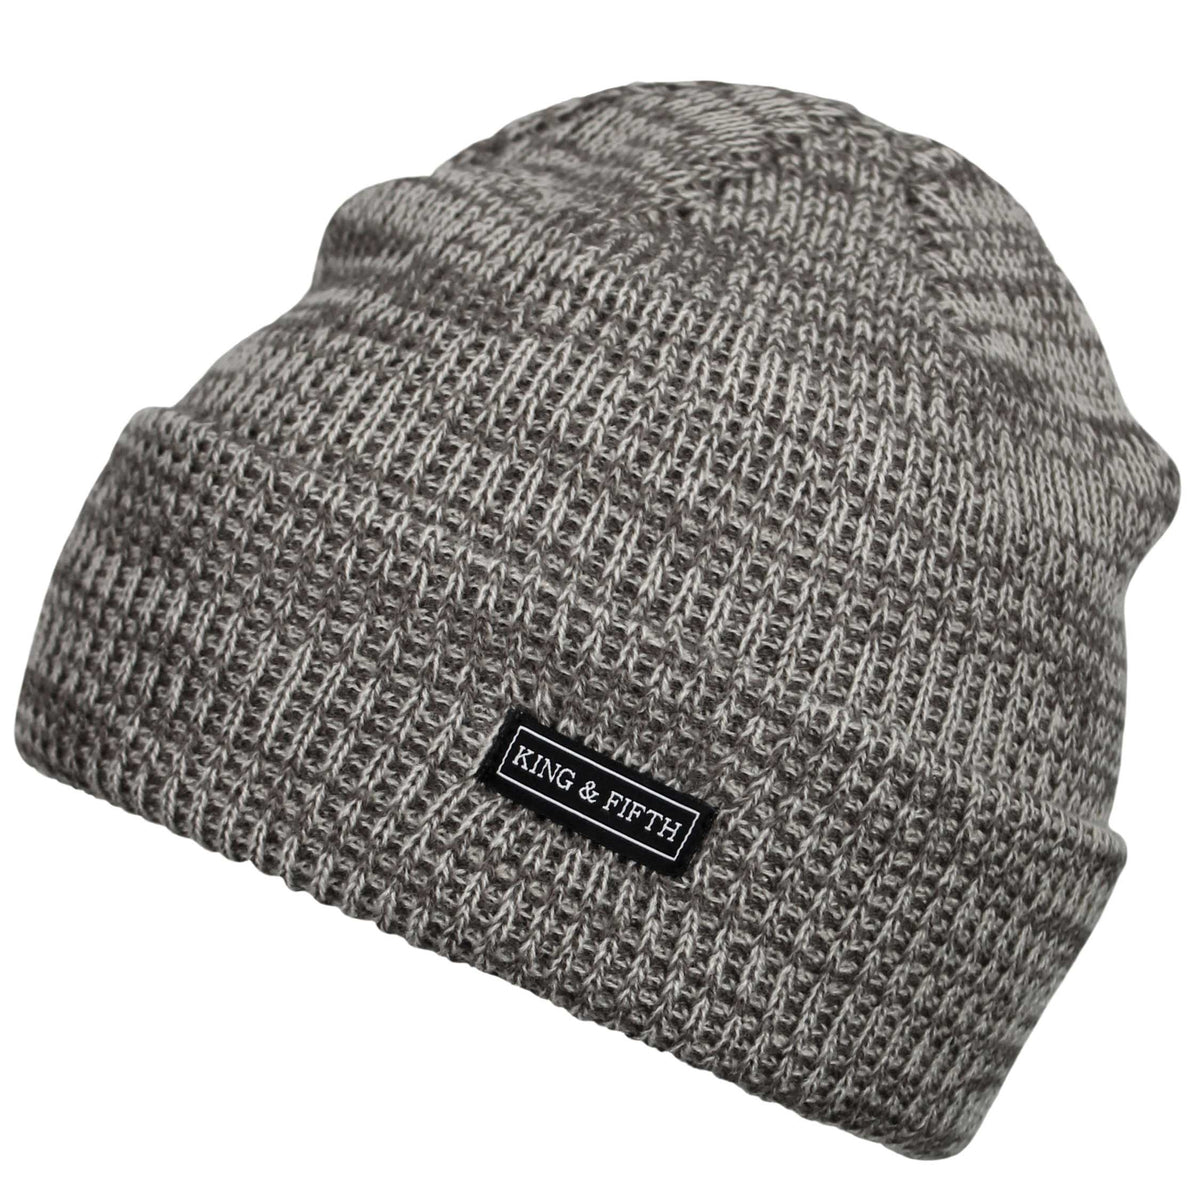 Mens Beanies by K&F®  Shop Beanies for Men & Mens Beanie Hats - King and  Fifth Supply Co.